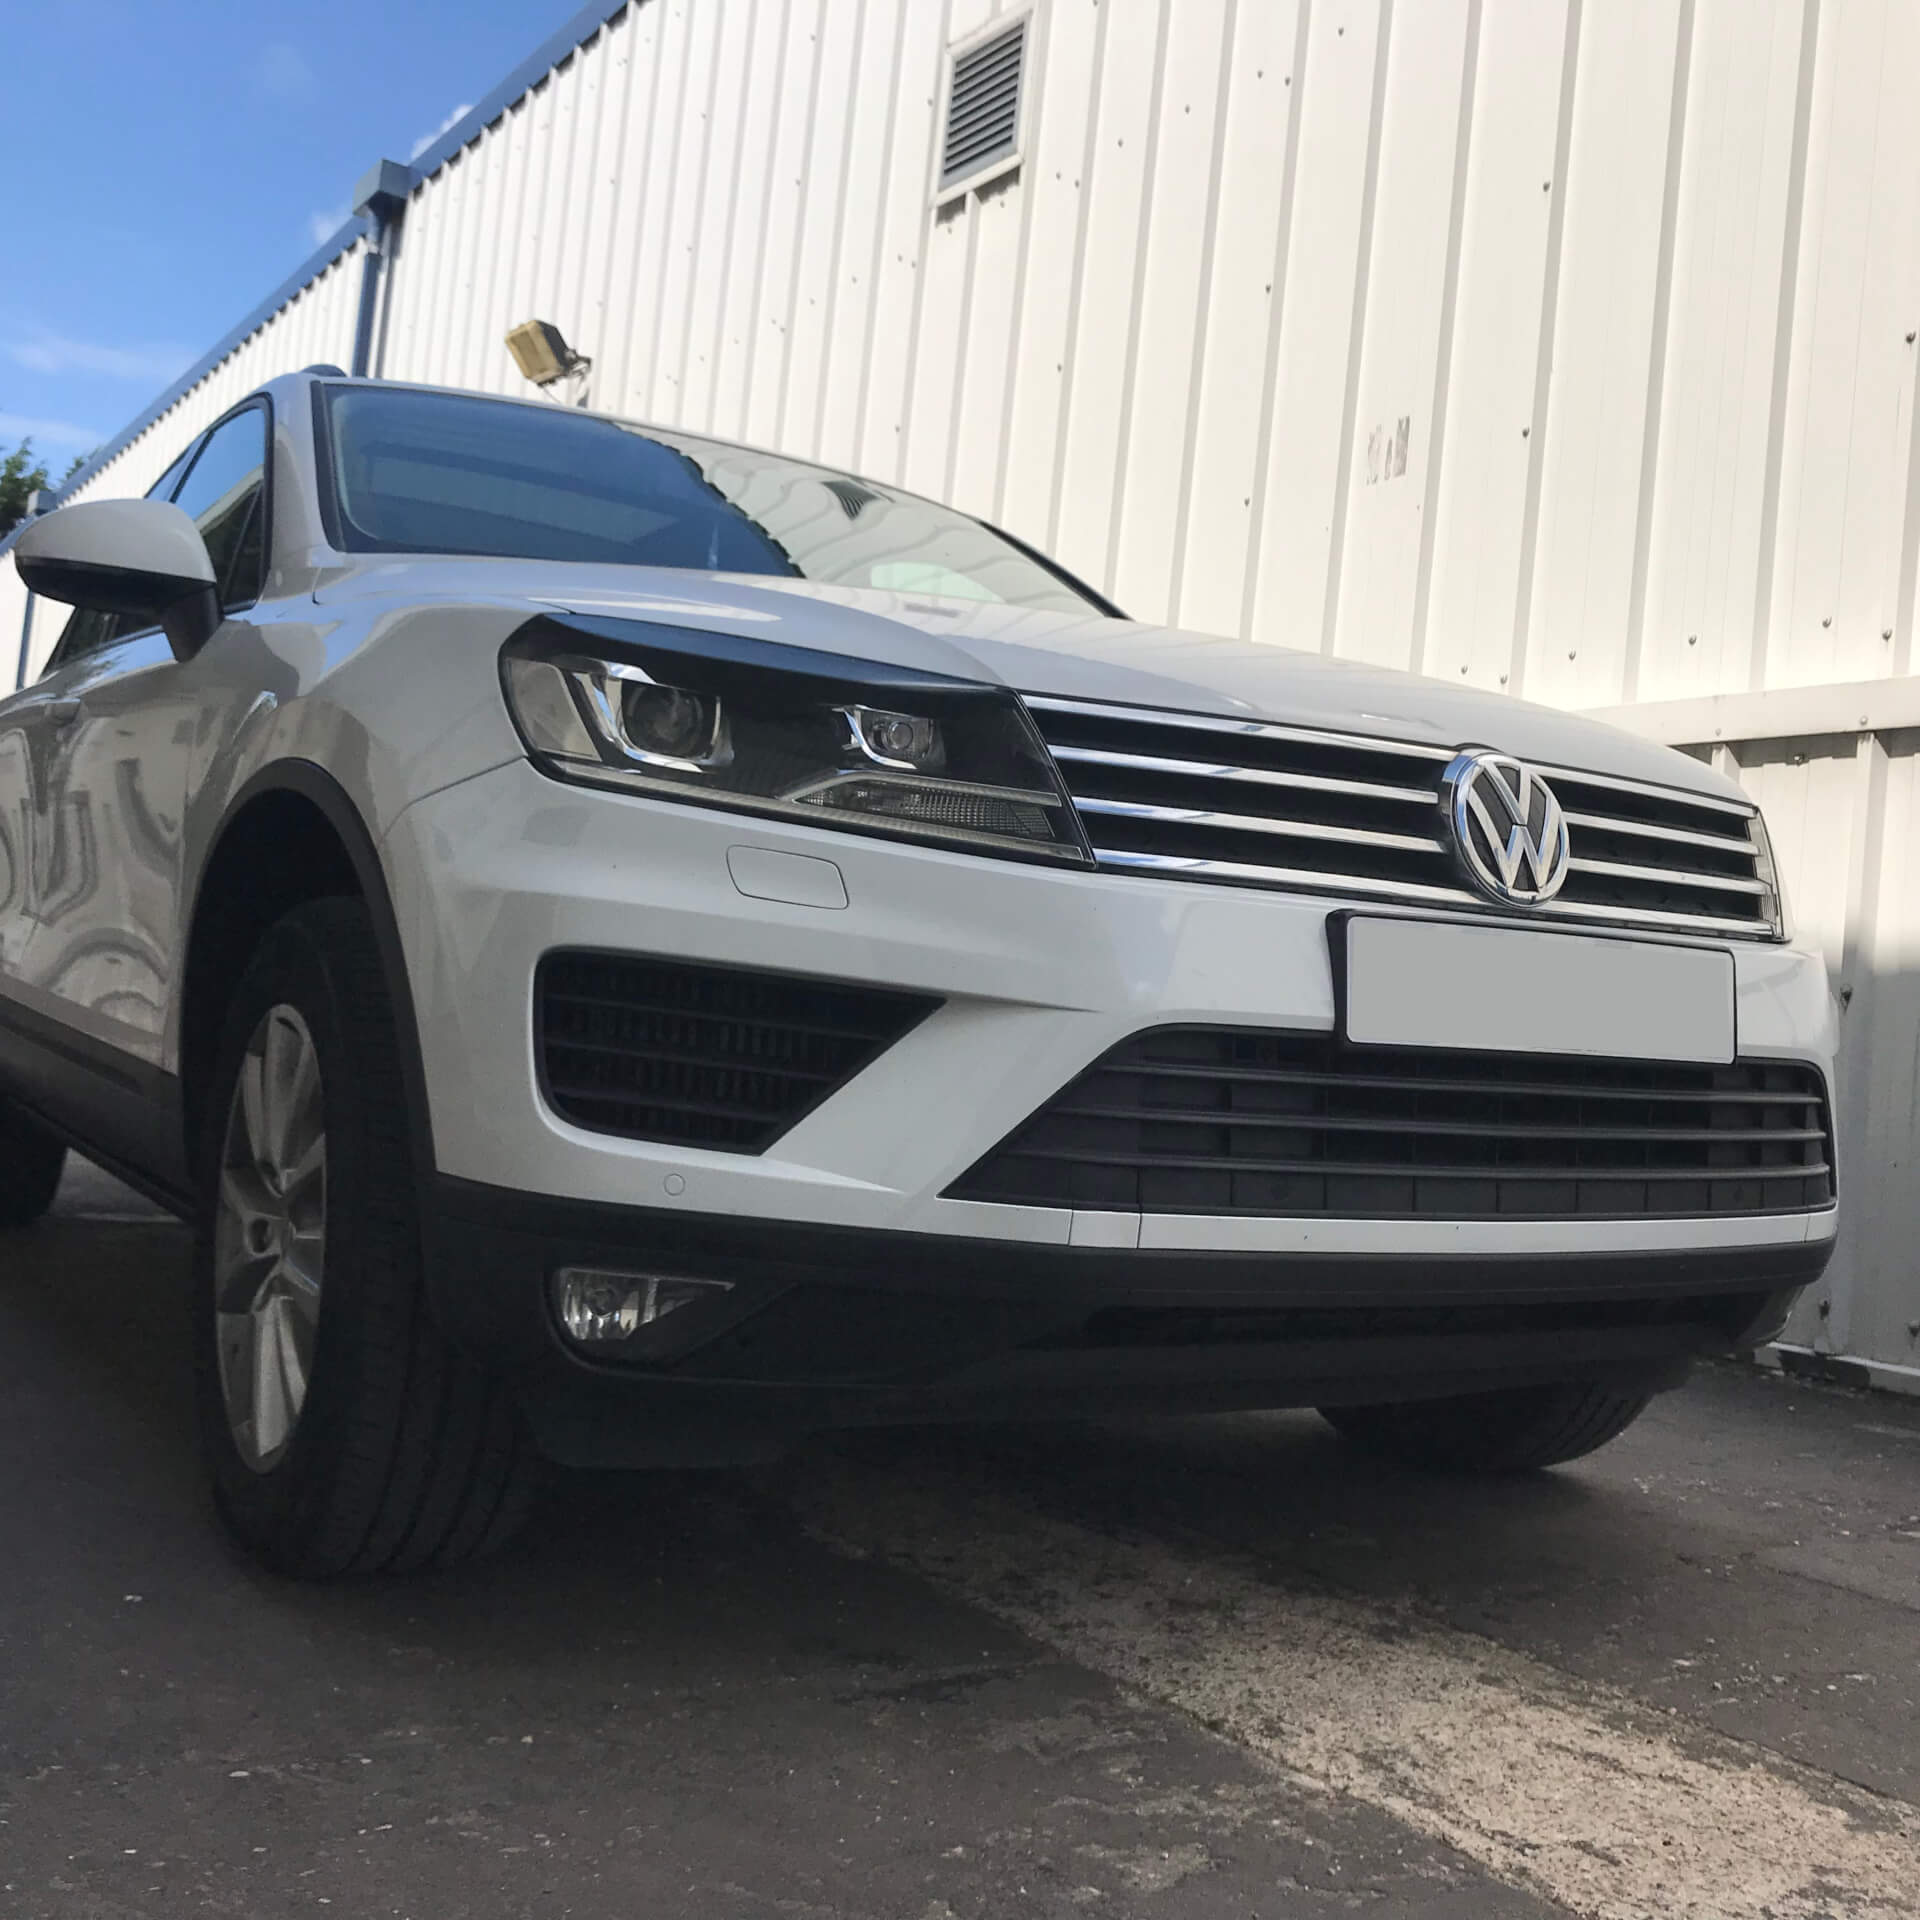 Direct4x4 accessories for Volkswagen Touareg vehicles with a photo of the front of a white volkswagen touareg outside our offices with blue sky above